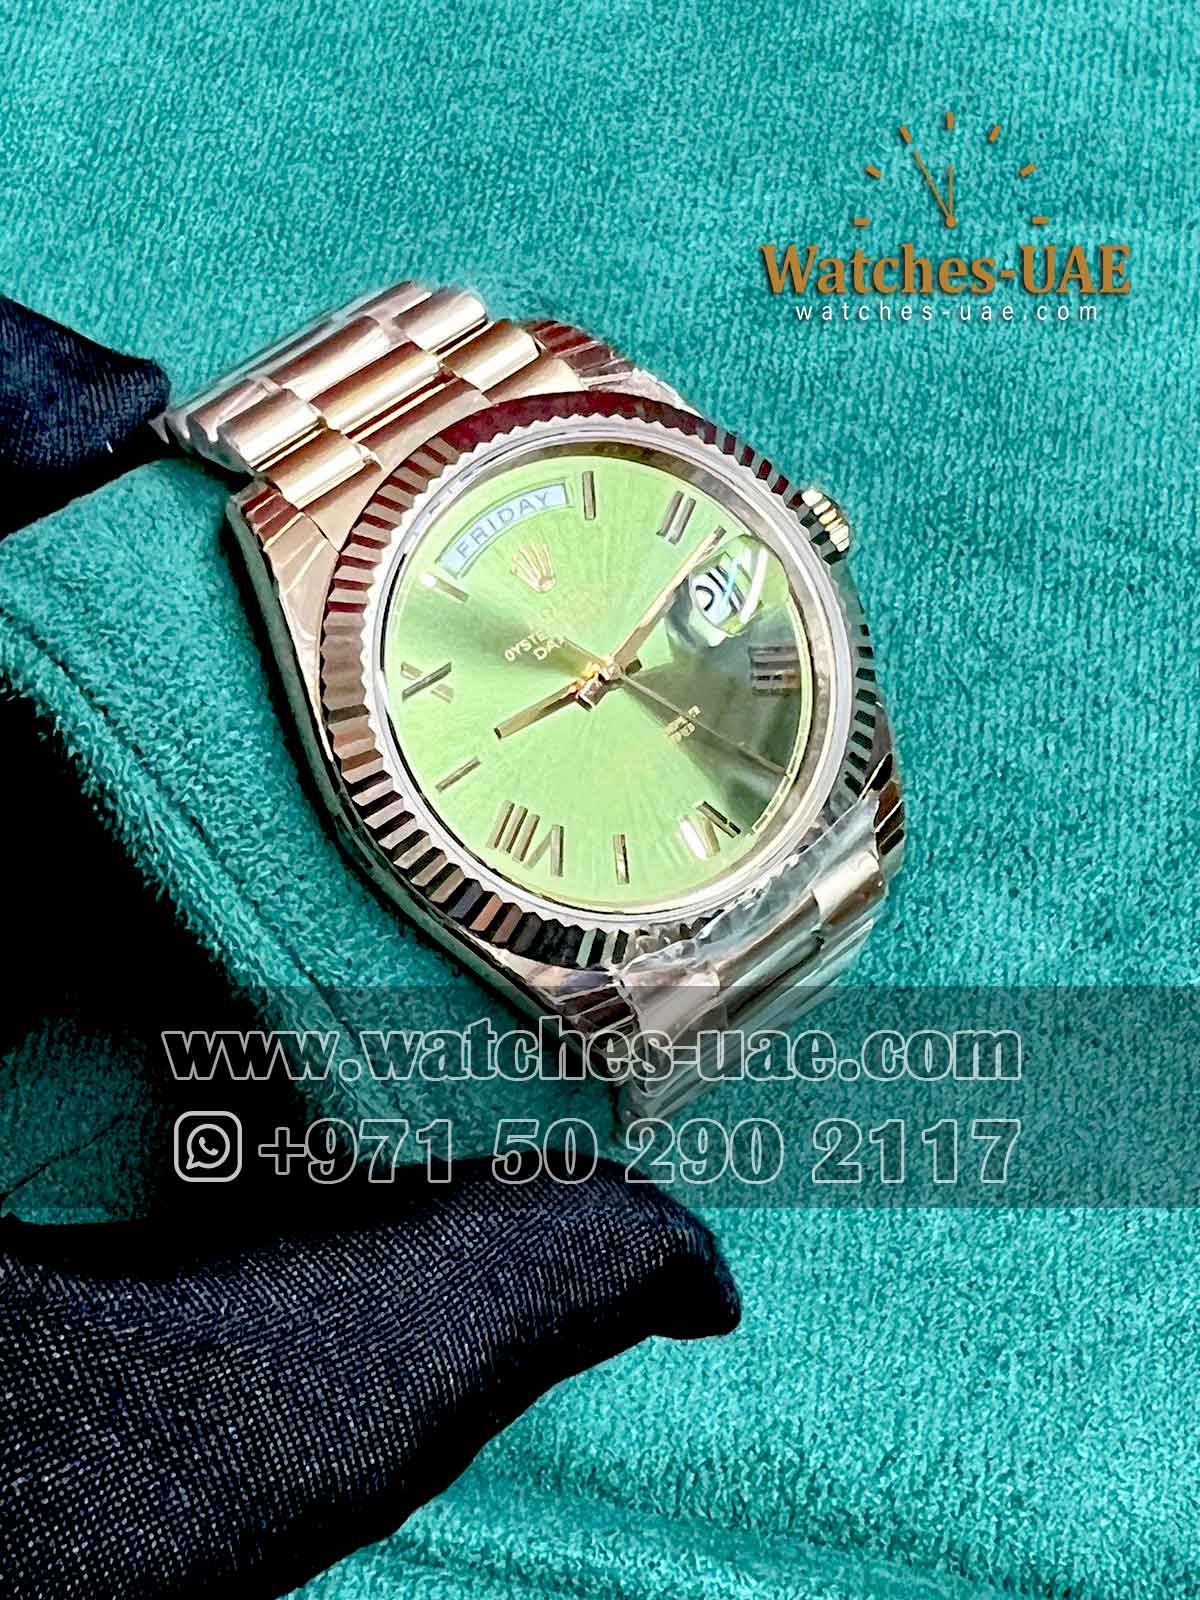 Rolex Day Date Green dial Rose gold 40 mm - Watches UAE